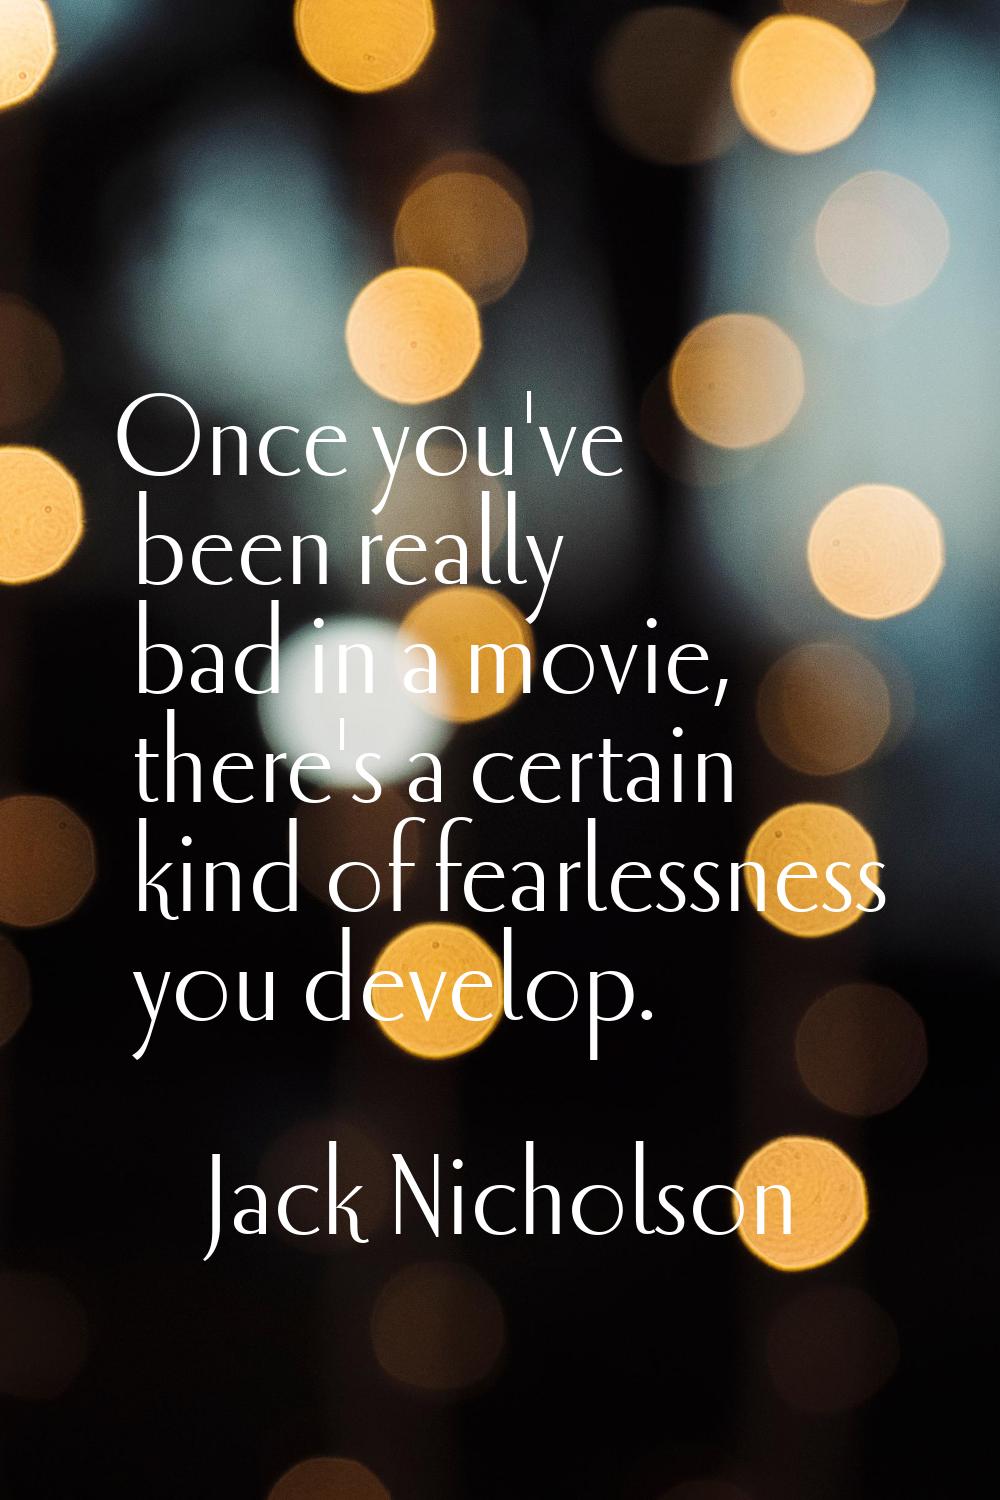 Once you've been really bad in a movie, there's a certain kind of fearlessness you develop.